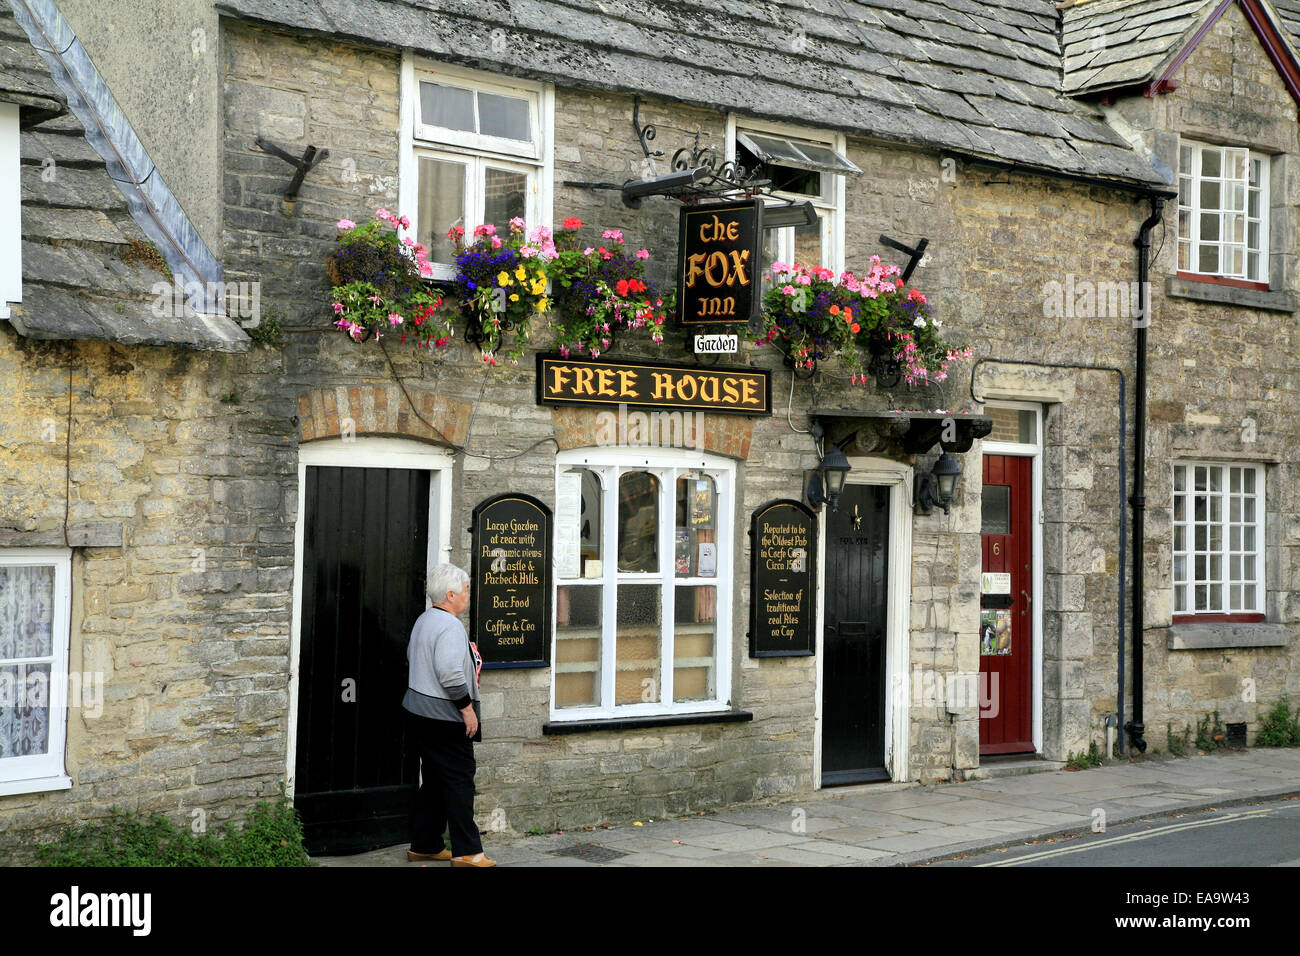 The very small Fox Inn said to be the oldest pub in Corfe Castle, Wareham, Dorset, England, UK. Stock Photo